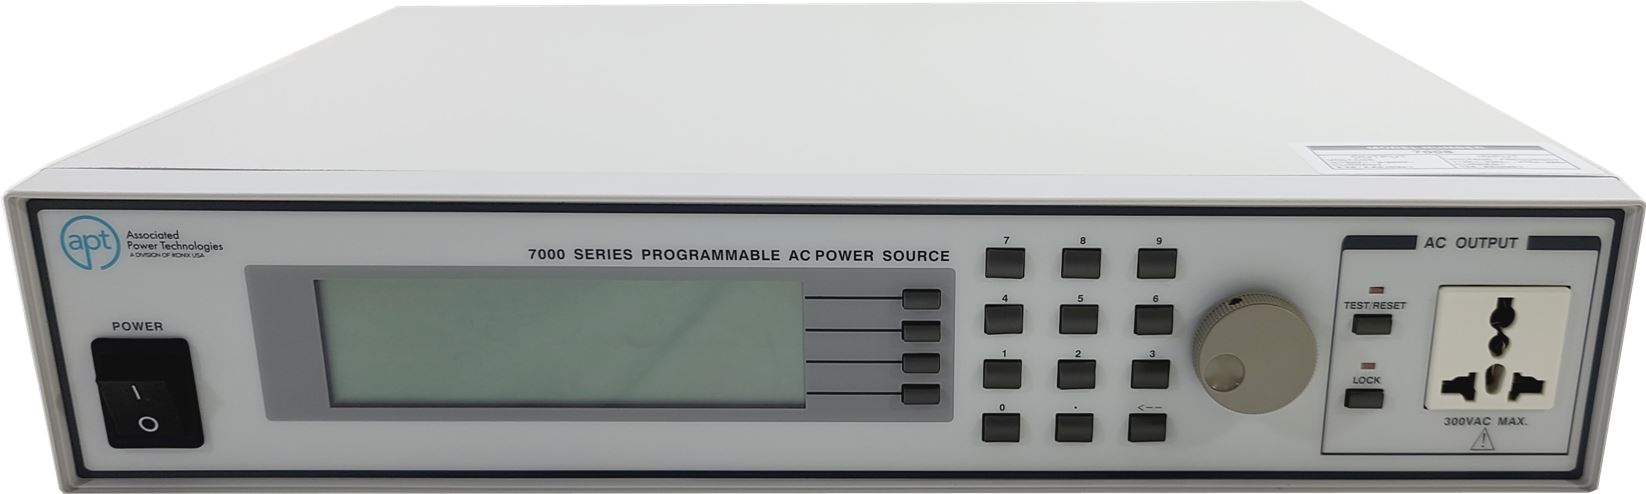 Associated Power Technologies 7008 for sale